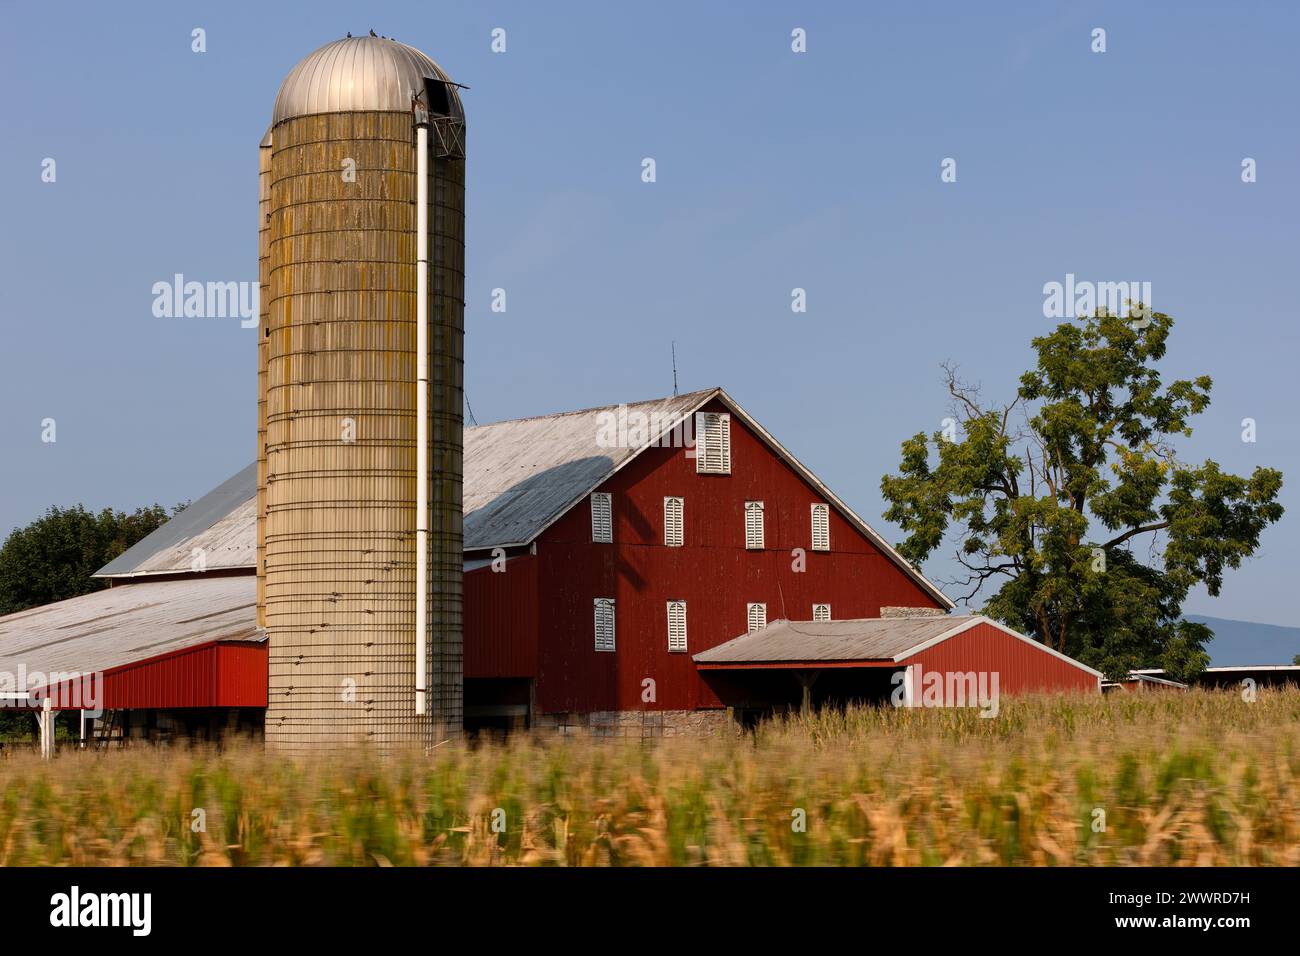 A country landscape with red barn and silo with a corn field in the foreground shot from a moving car. Stock Photo